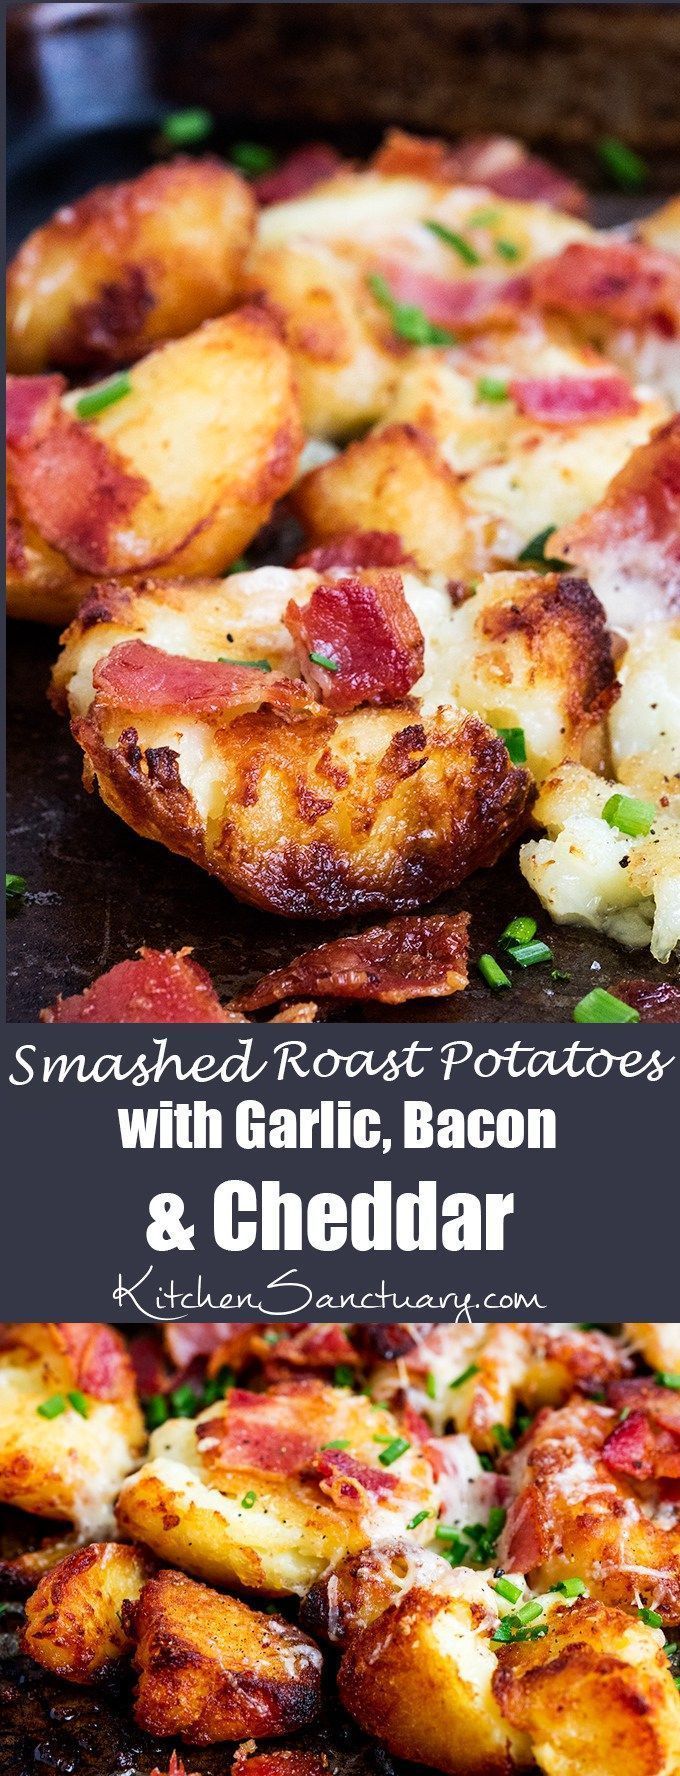 Perfectly Crunchy Roast Potatoes with Garlic, Bacon and Cheddar! -   21 romantic dinner recipes
 ideas